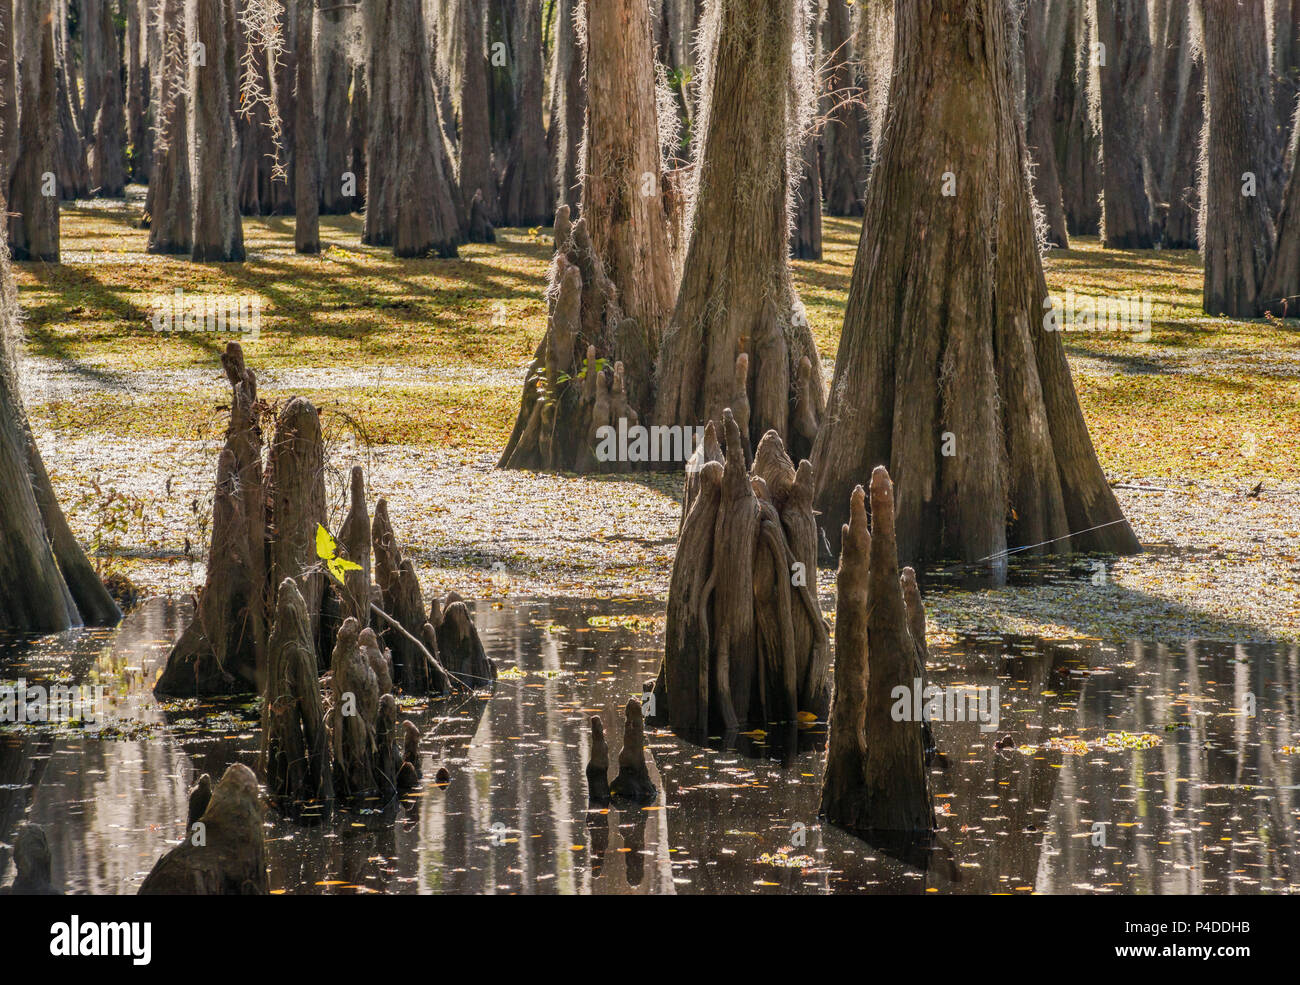 Bald cypress trees covered with spanish moss and cypress knees at swamp in late autumn, South Shore area at Caddo Lake, Texas, USA Stock Photo